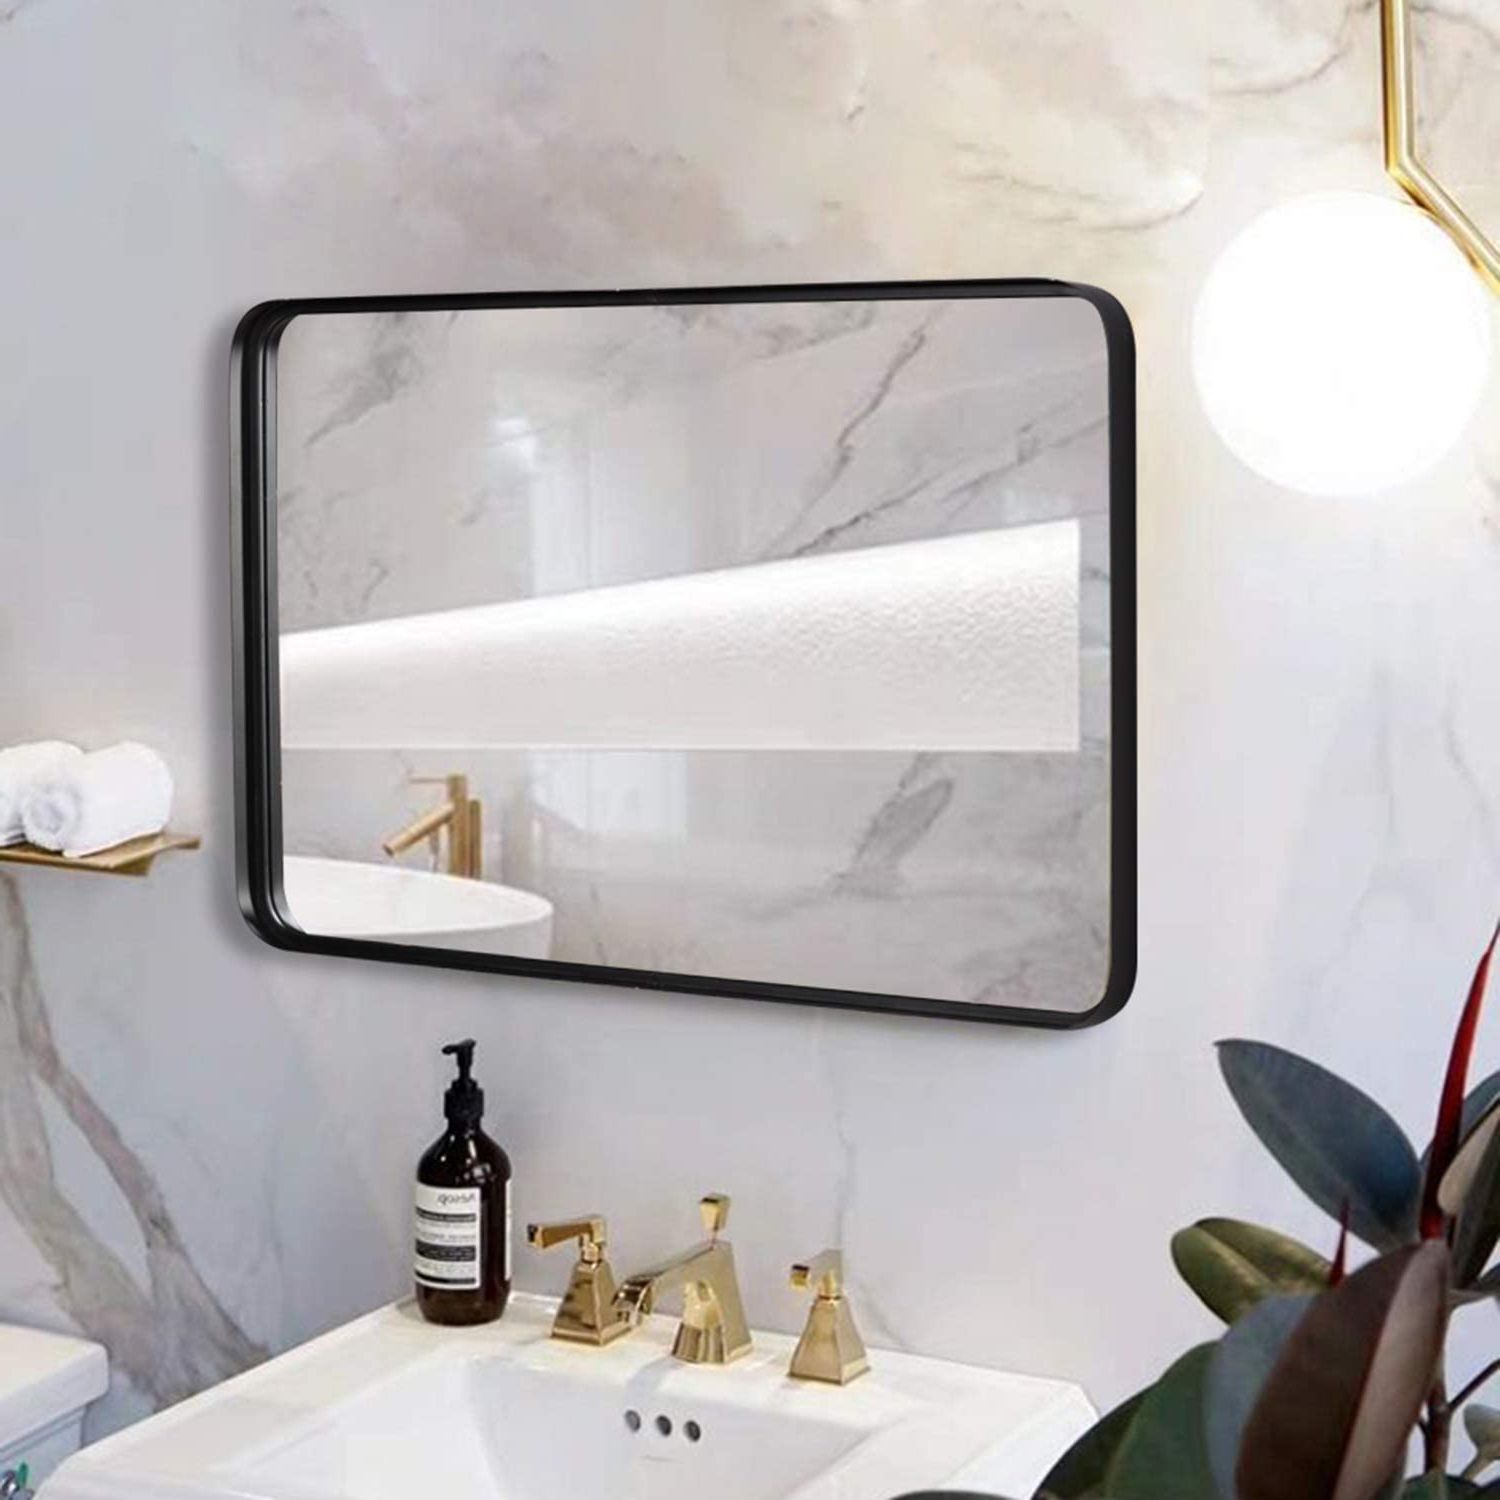 Most Popular Amazon: Black Wall Framed Rectangular Mirrors For Bathrooms (24"x36 Inside Square Oversized Wall Mirrors (View 1 of 15)